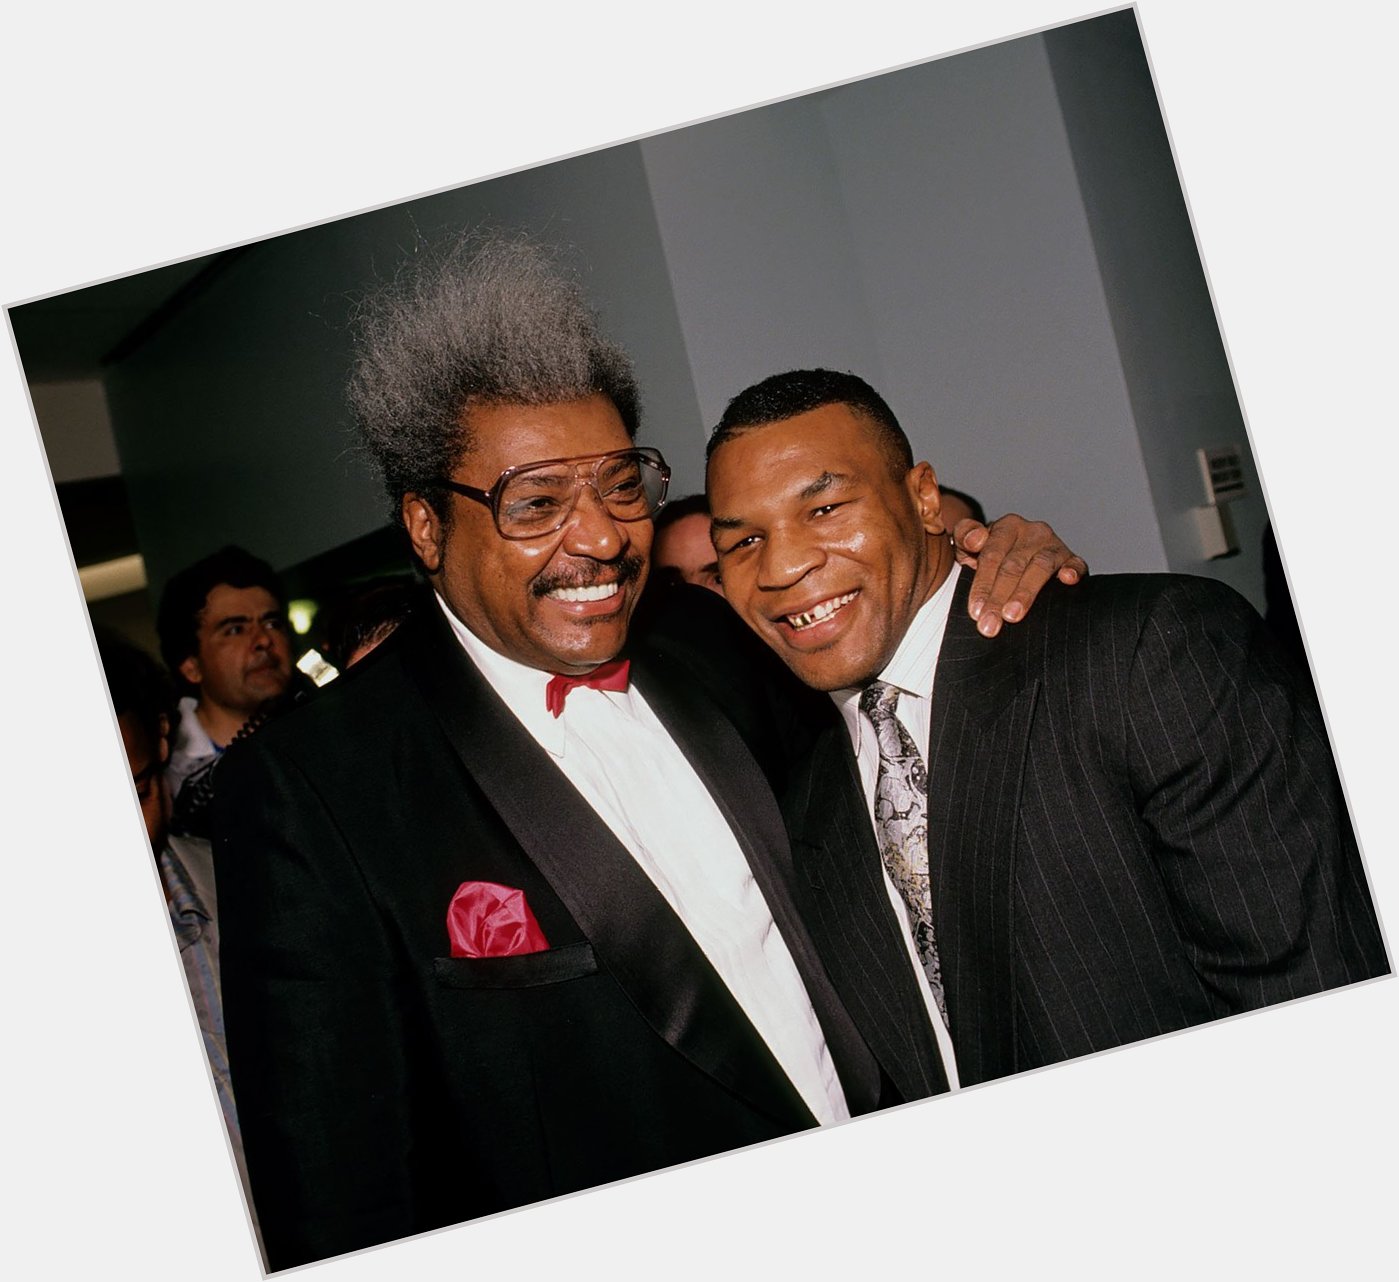 Happy Birthday to Don King, who turns 87 today!  